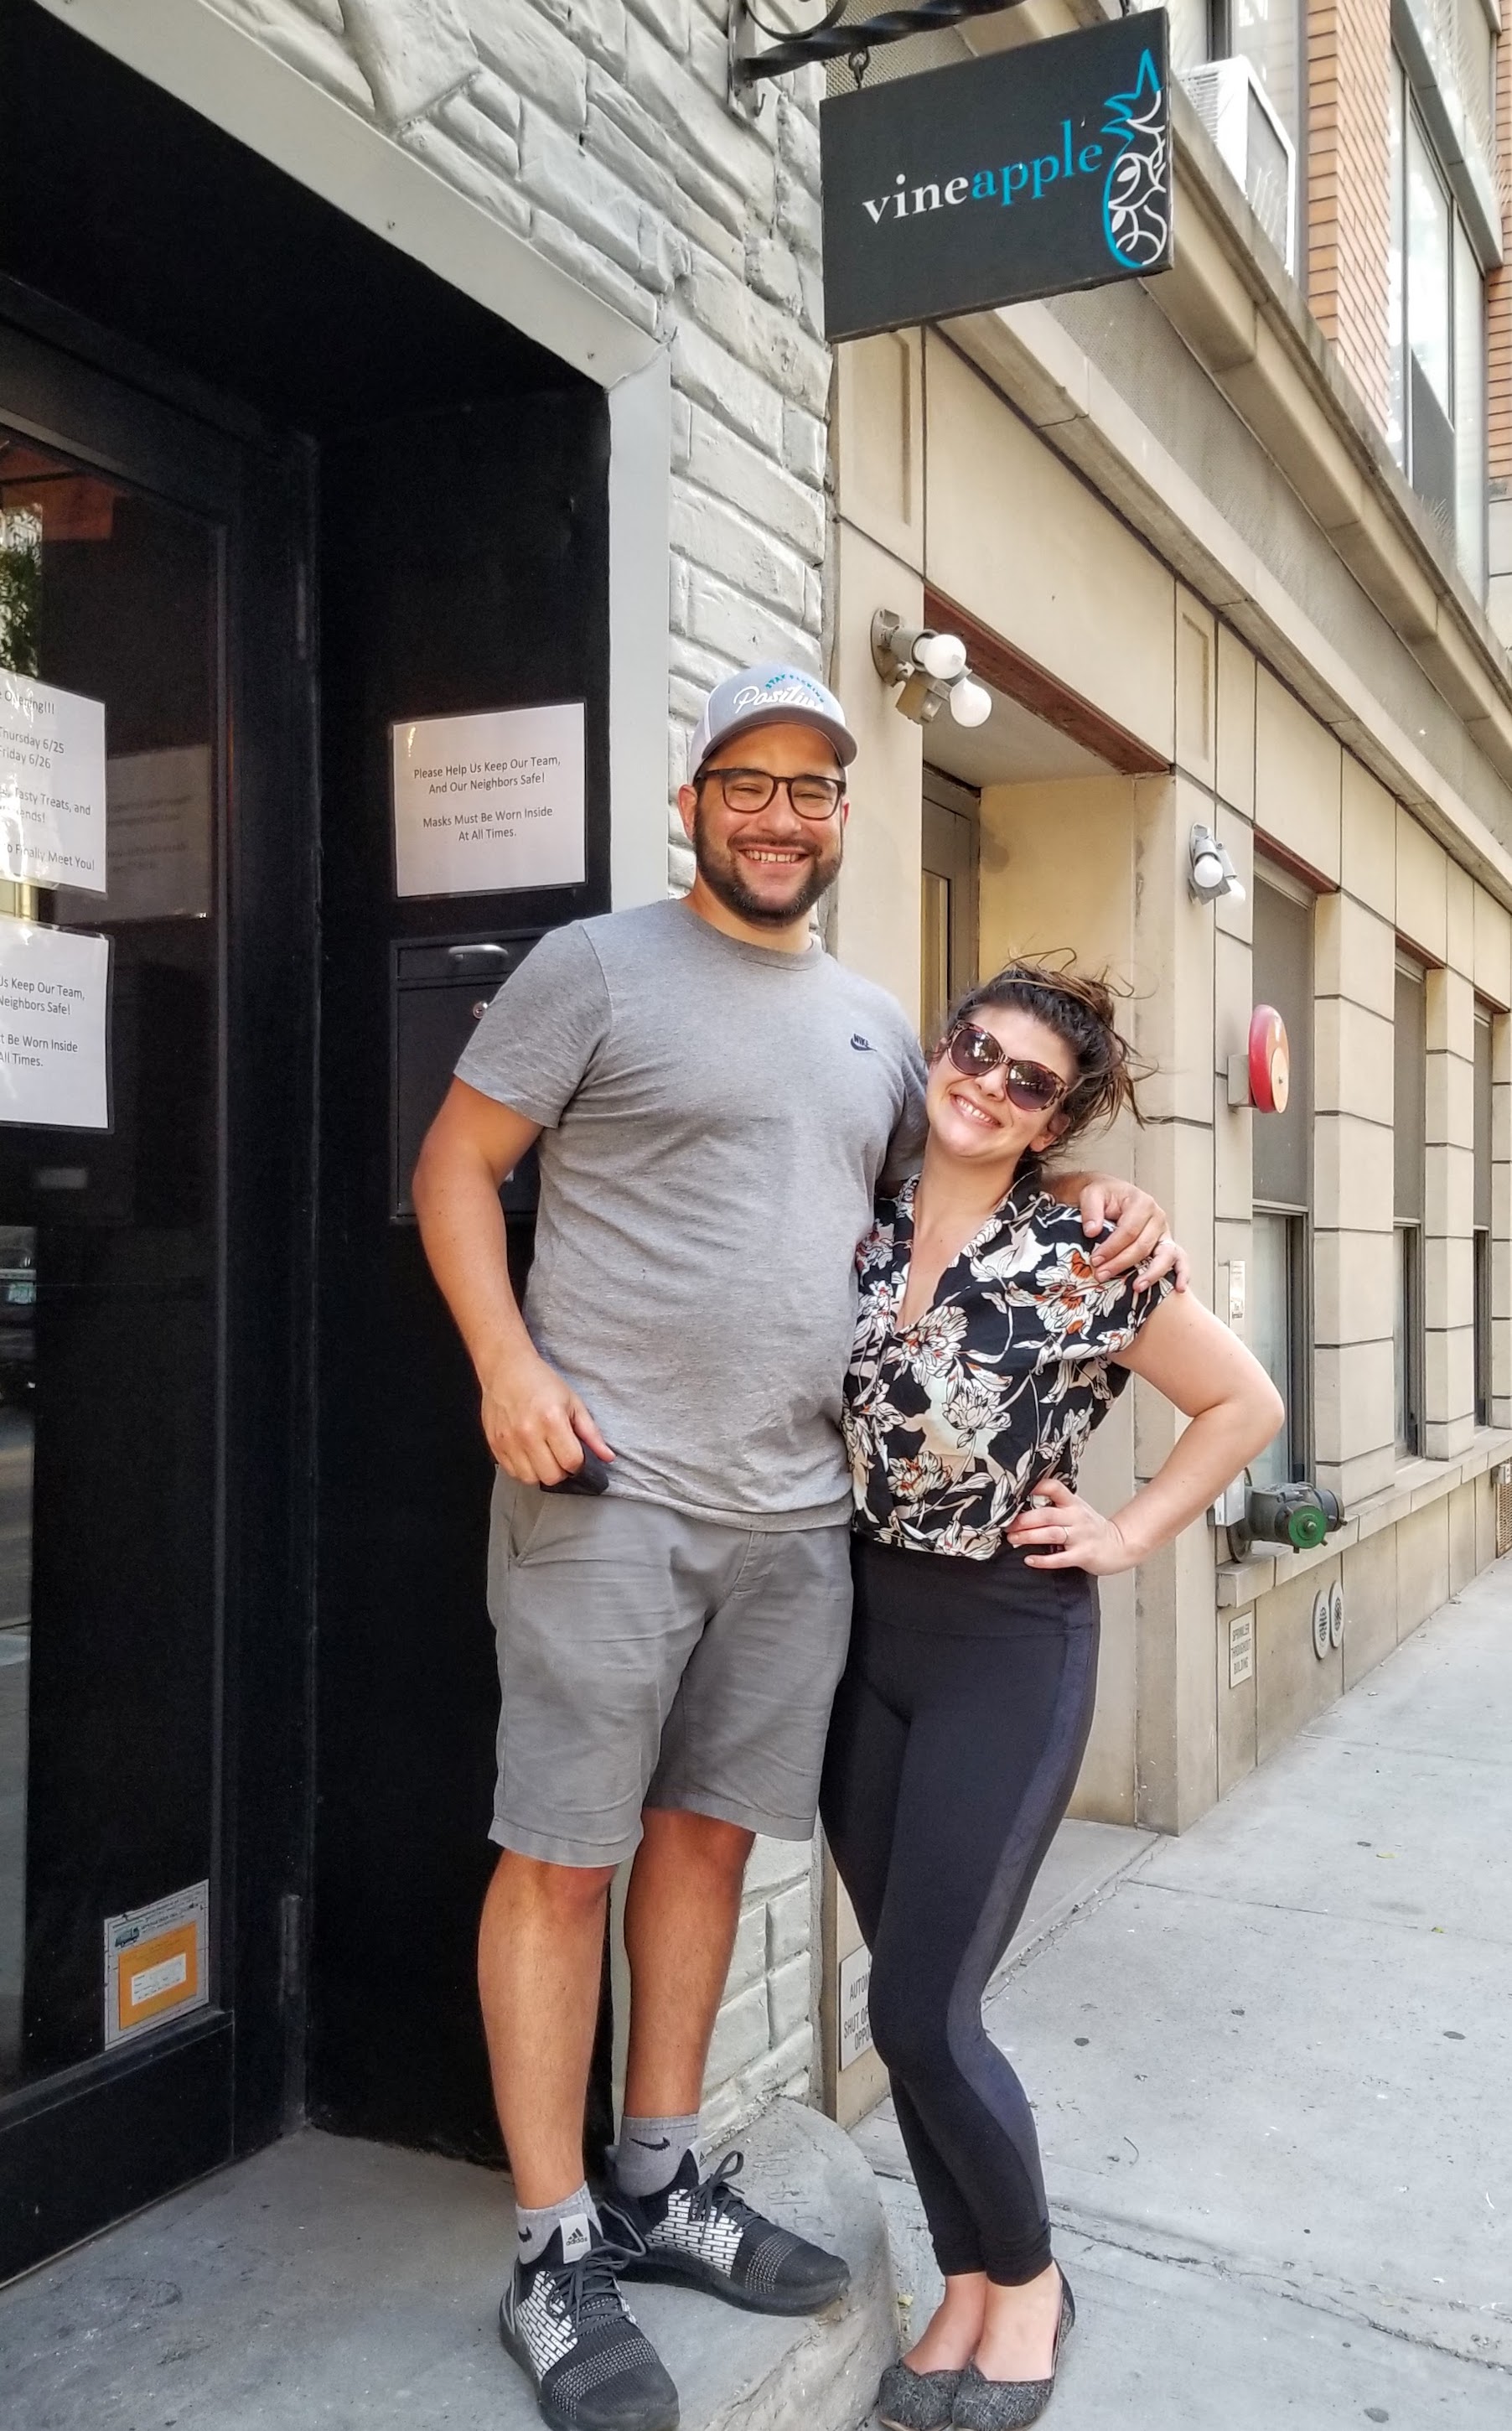 Aubrie Therrien and Zac Rubin, new owners of Vineapple